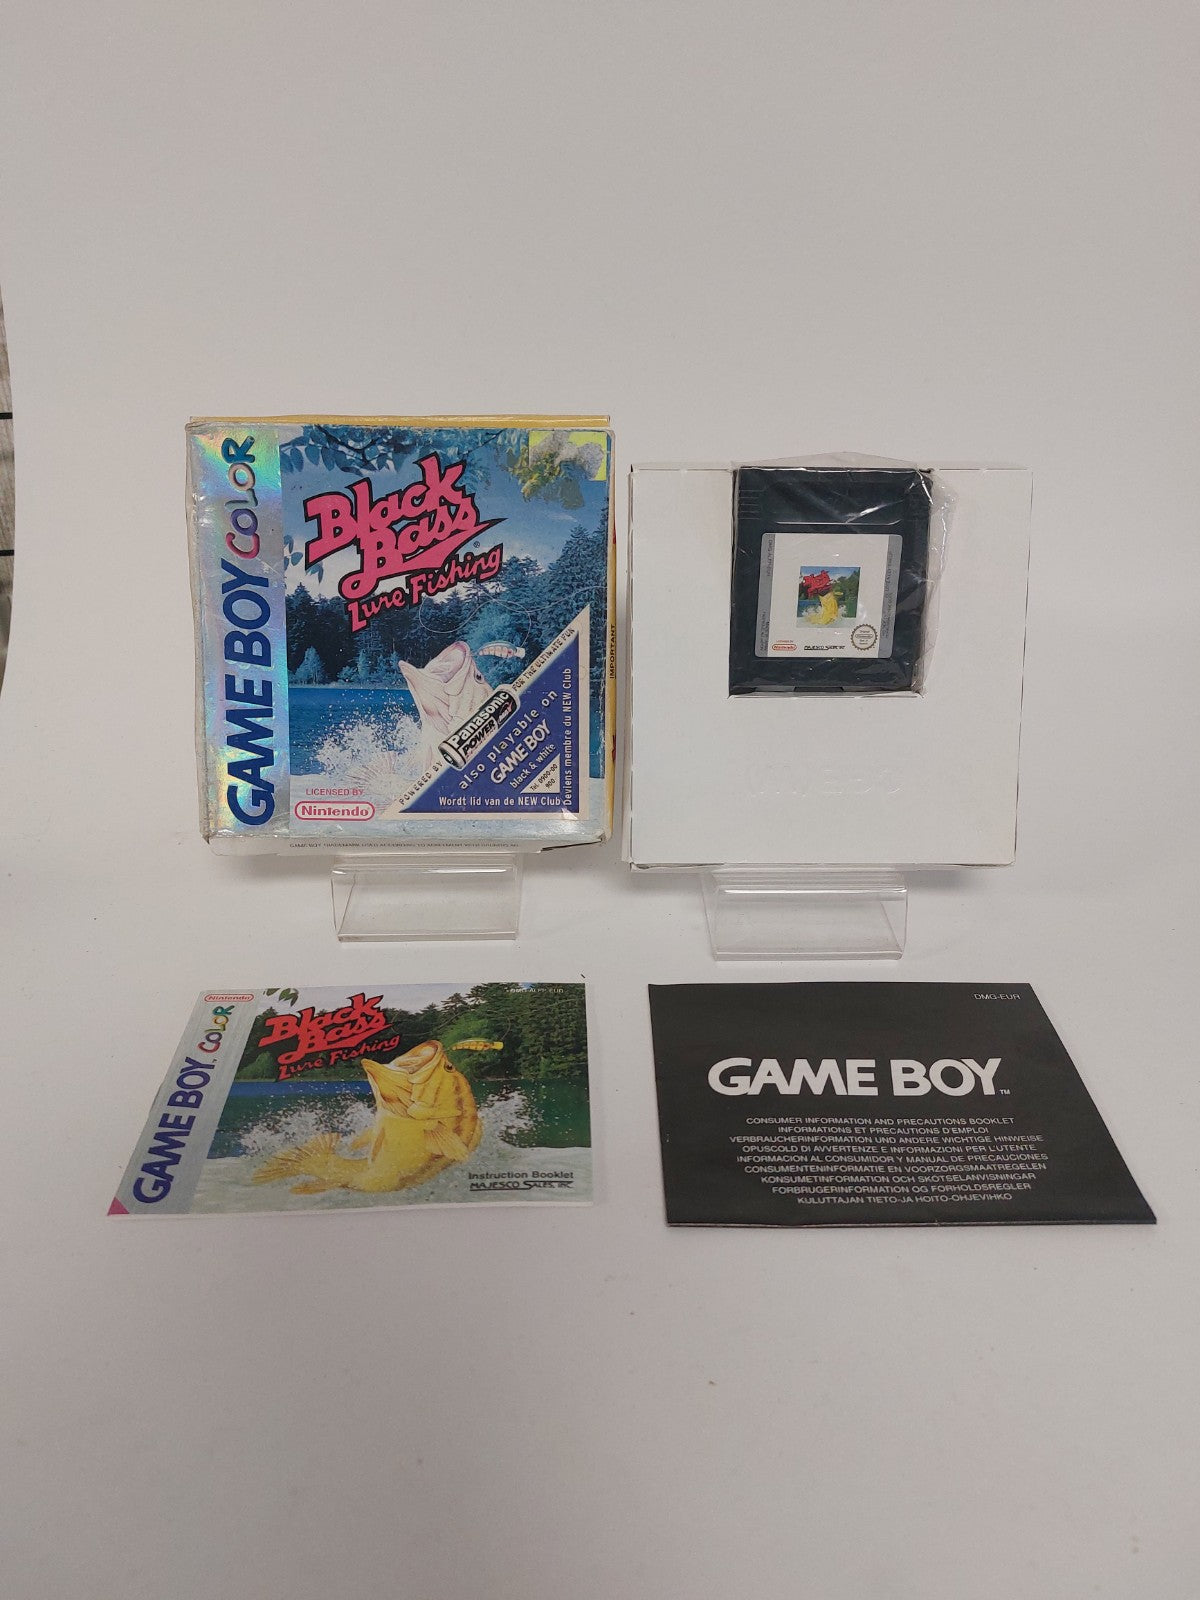 Black Bass Lure Fishing Game Boy Color